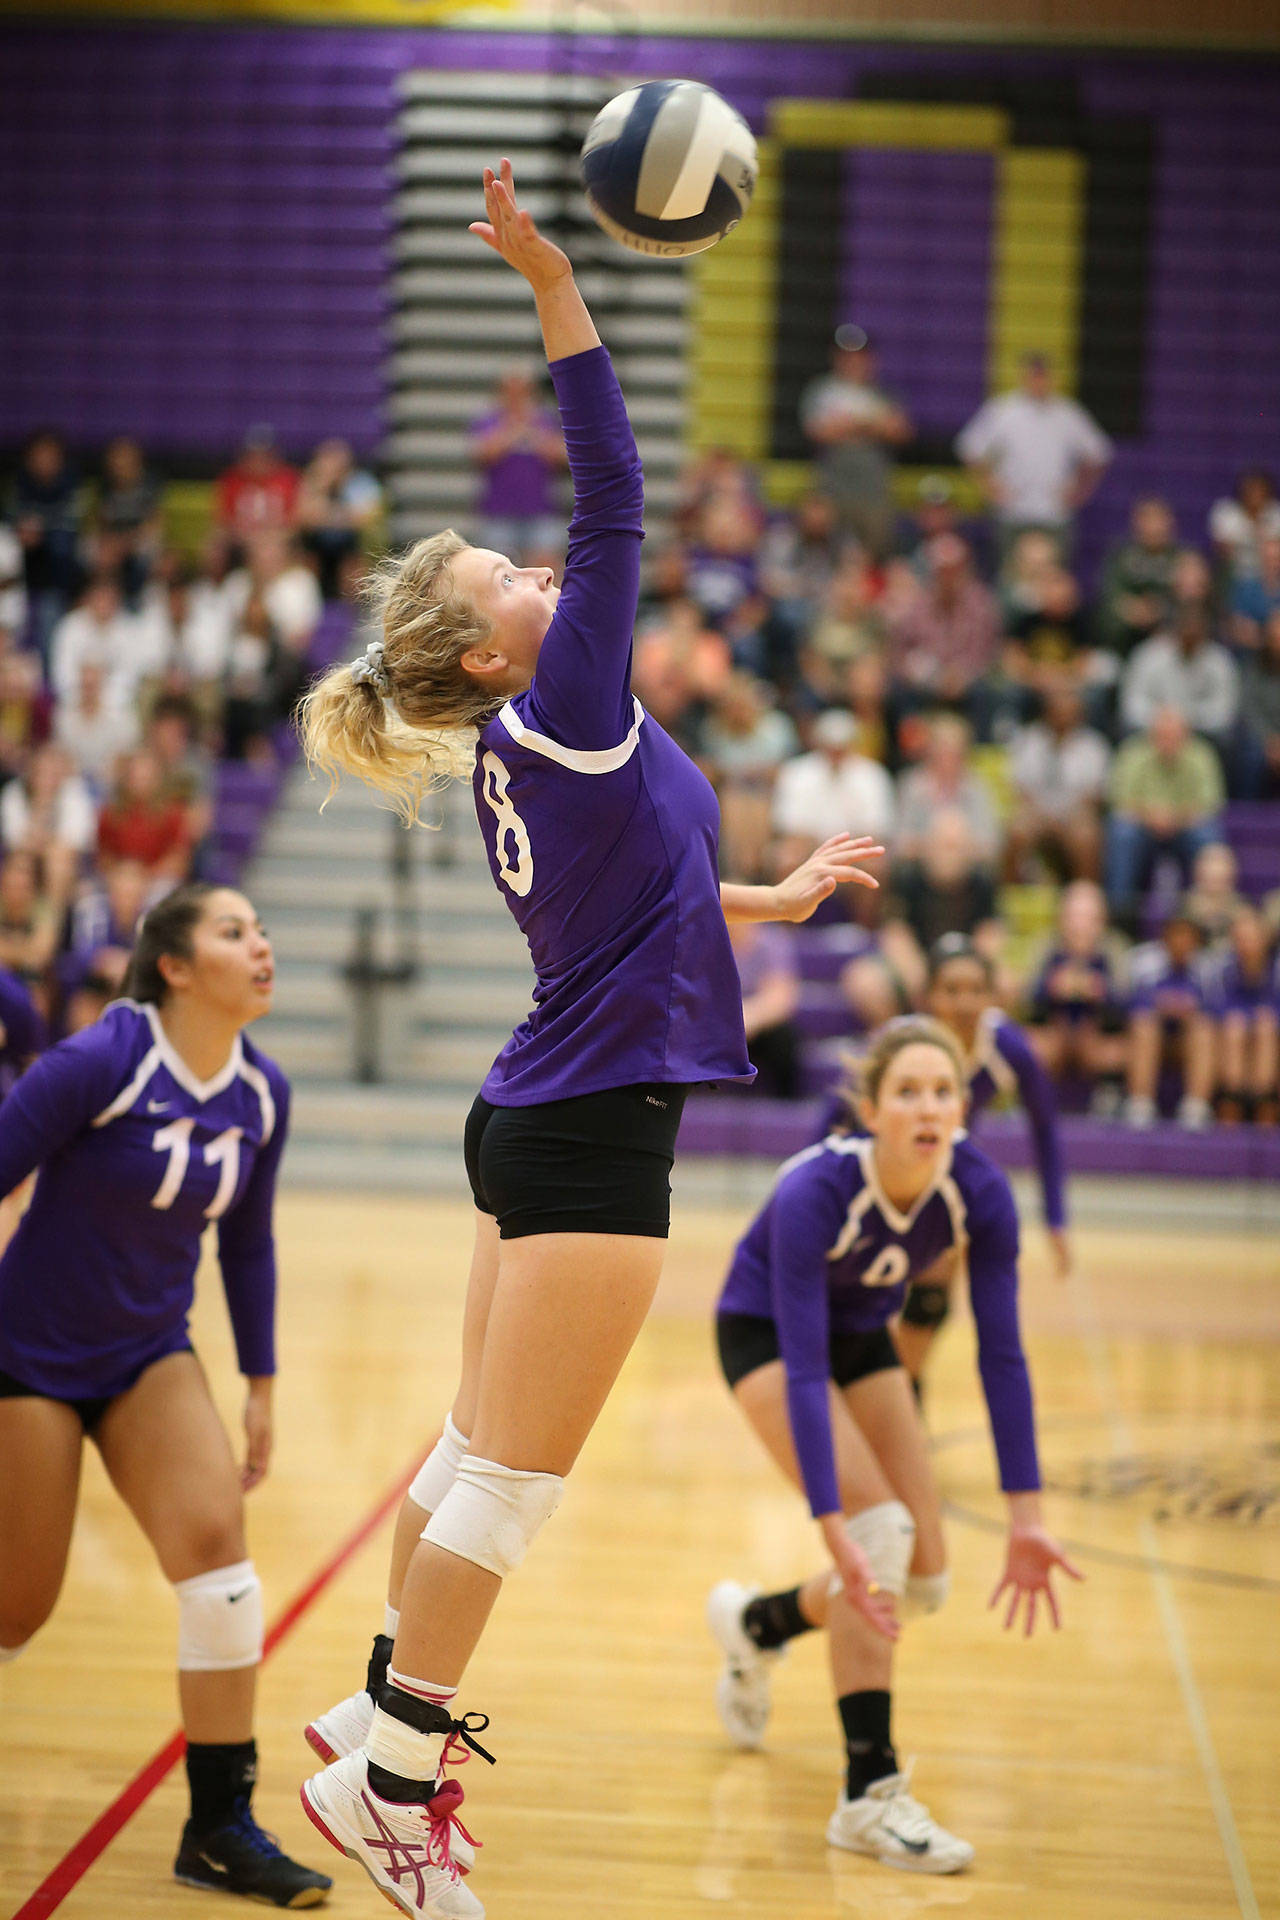 Female Athlete of the Year Cami Bristow goes for a kill during a match last fall. (Photo by John Fisken)